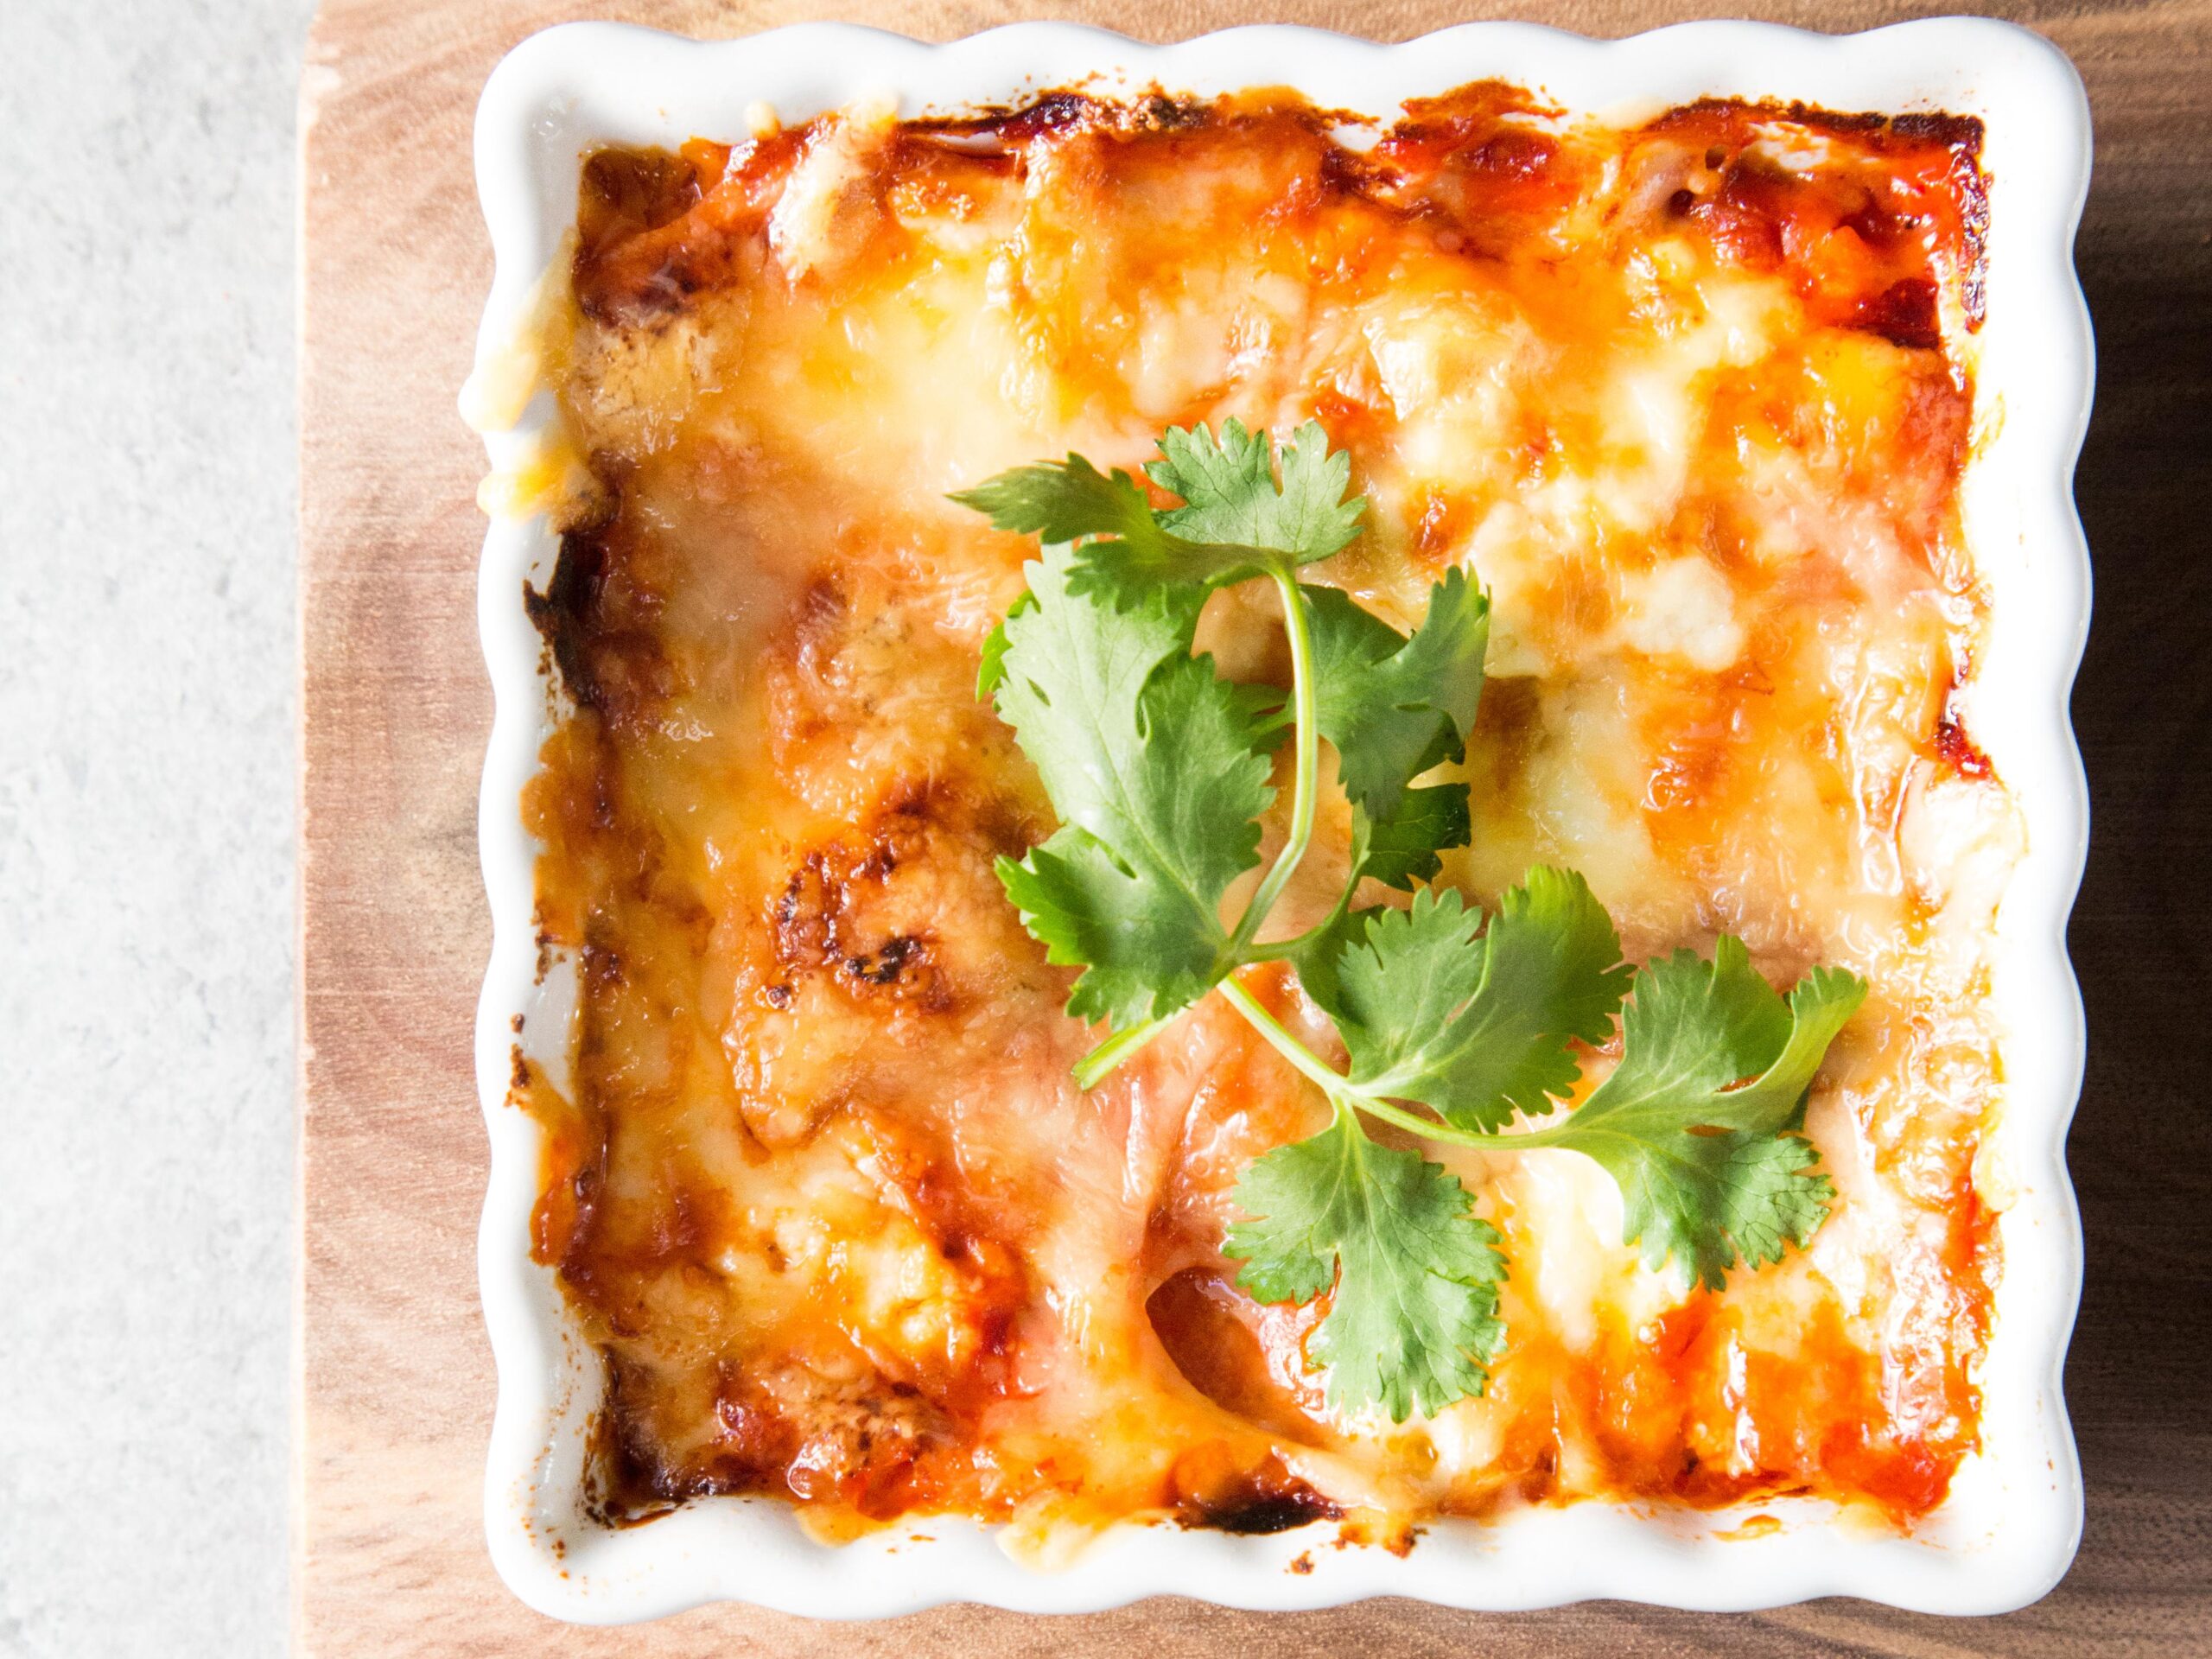  Layers of savory goodness await in this slow cooker vegetarian lasagna.